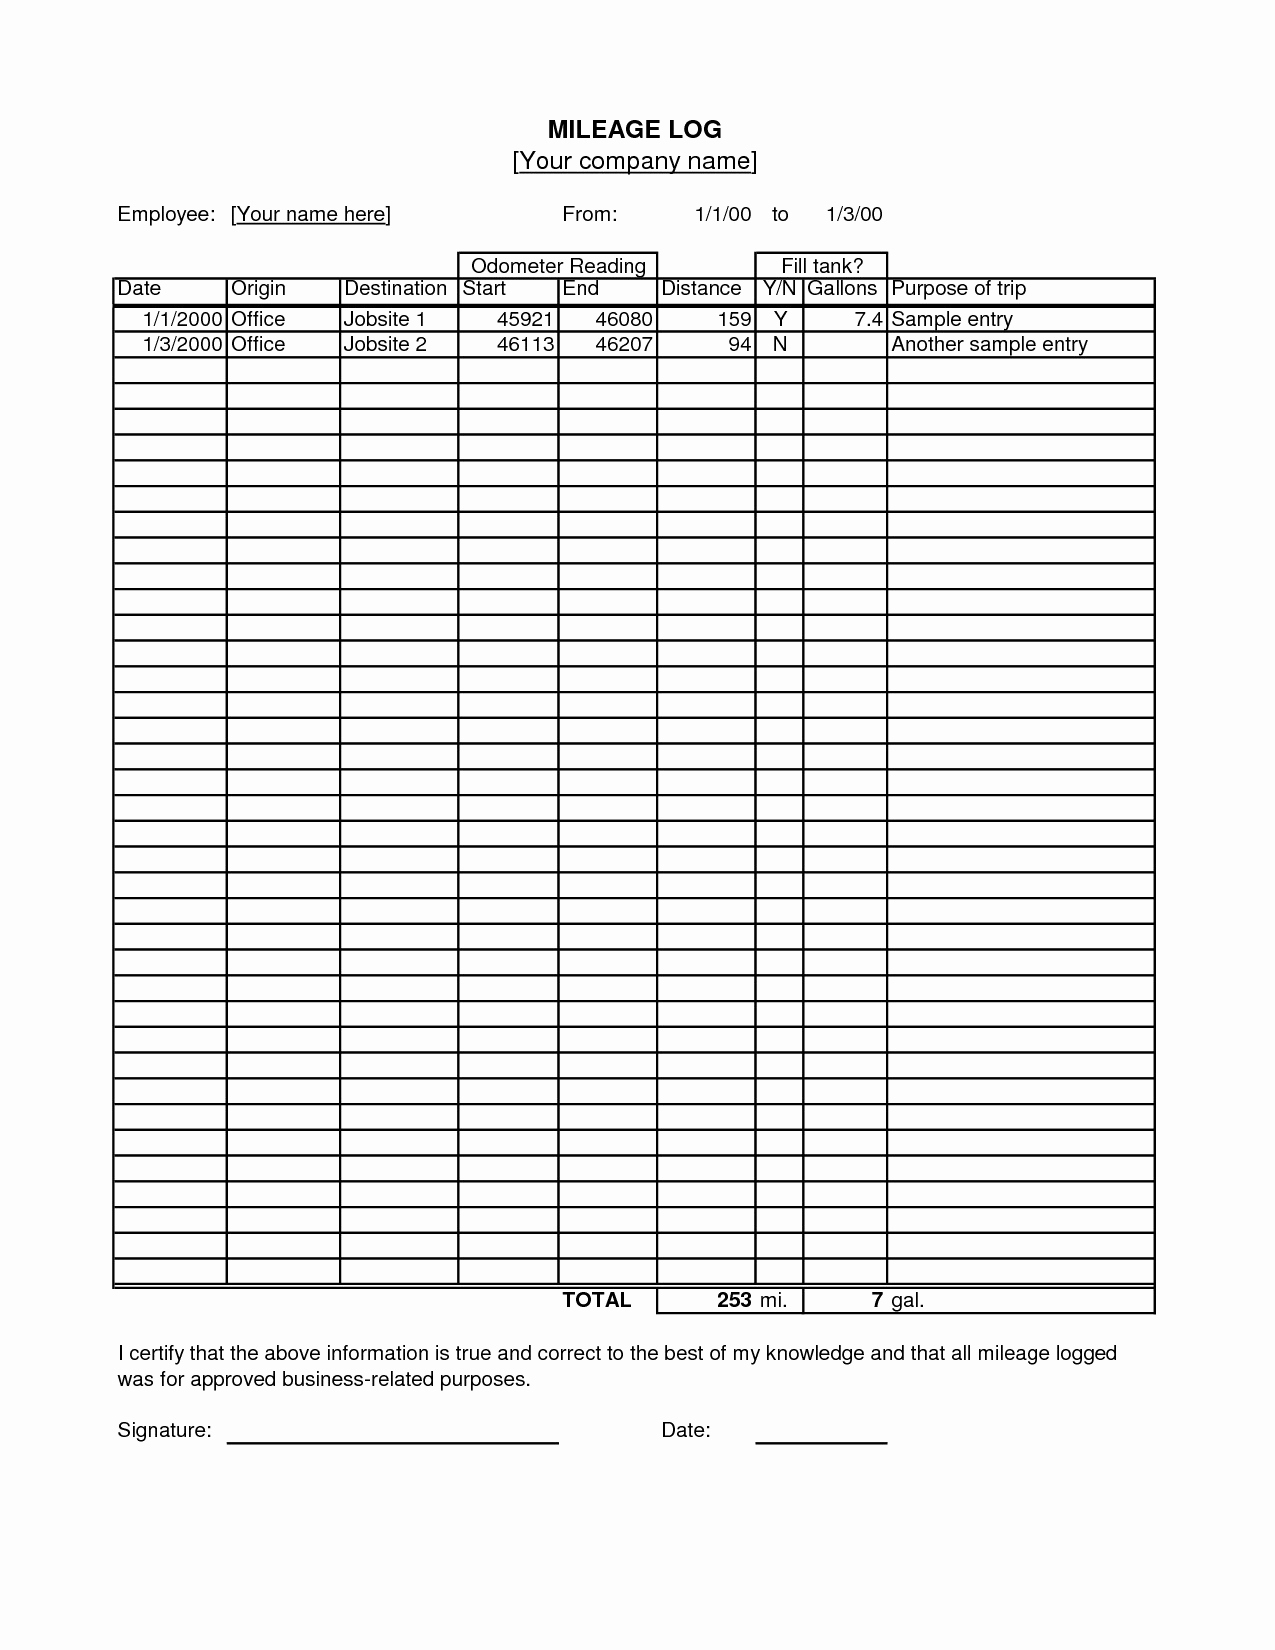 mileage-log-spreadsheet-intended-for-22-printable-mileage-log-examples-pdf-db-excel